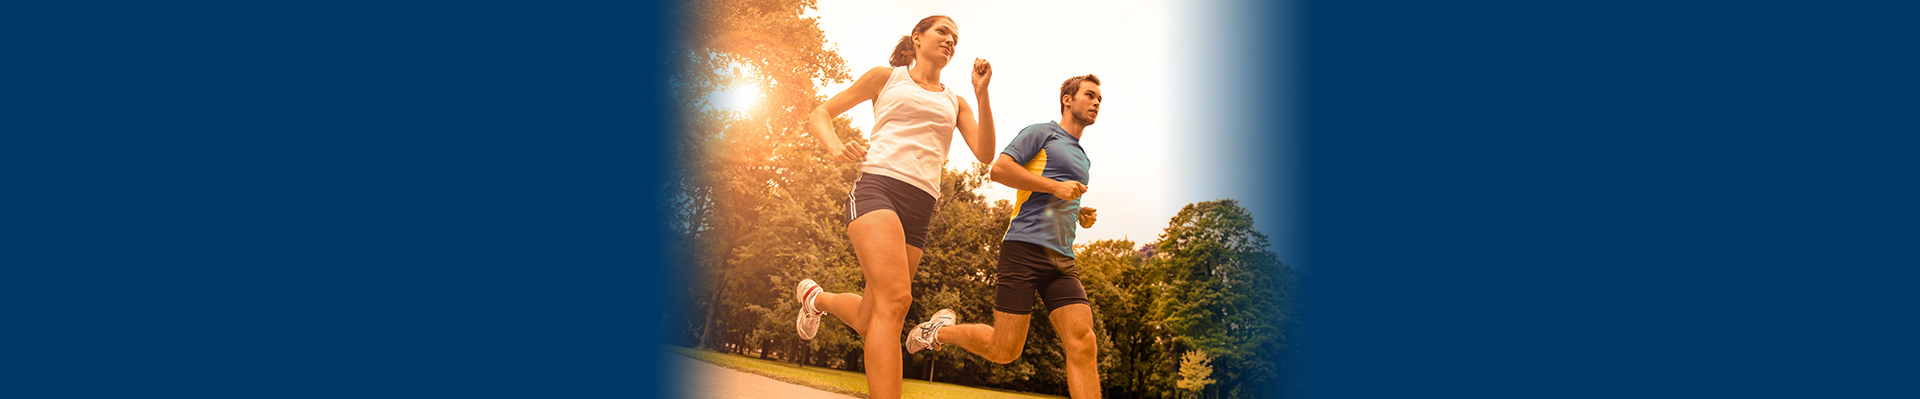 Banner picture of a female and male outside jogging. There is the sun beaming through the trees behind them as they run.